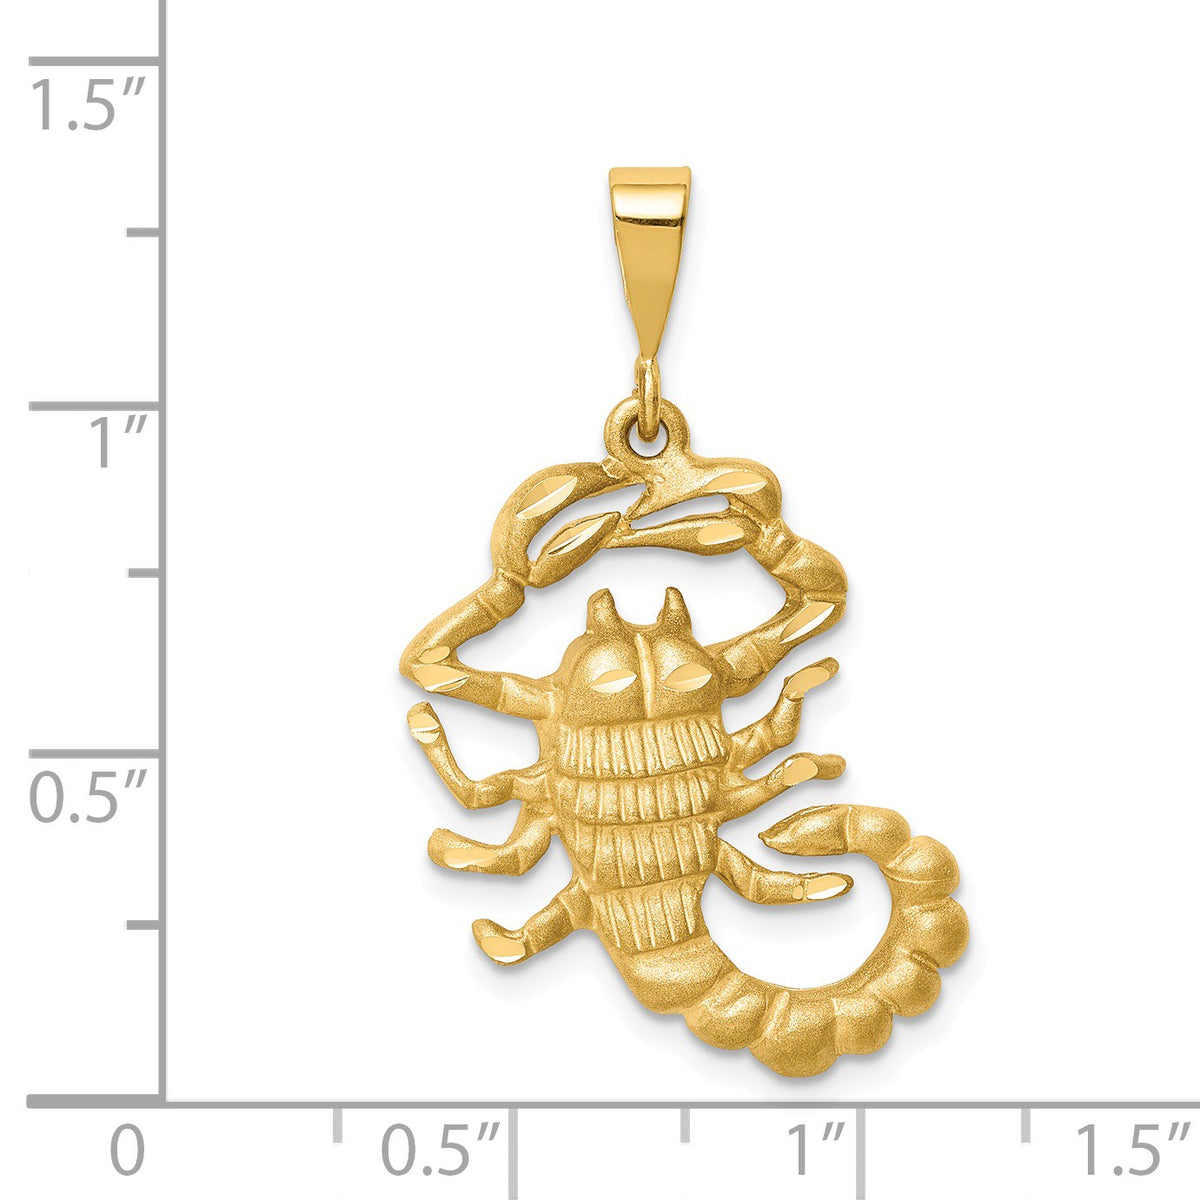 Alternate view of the 14k Yellow Gold Large Scorpio the Scorpion Zodiac Pendant by The Black Bow Jewelry Co.